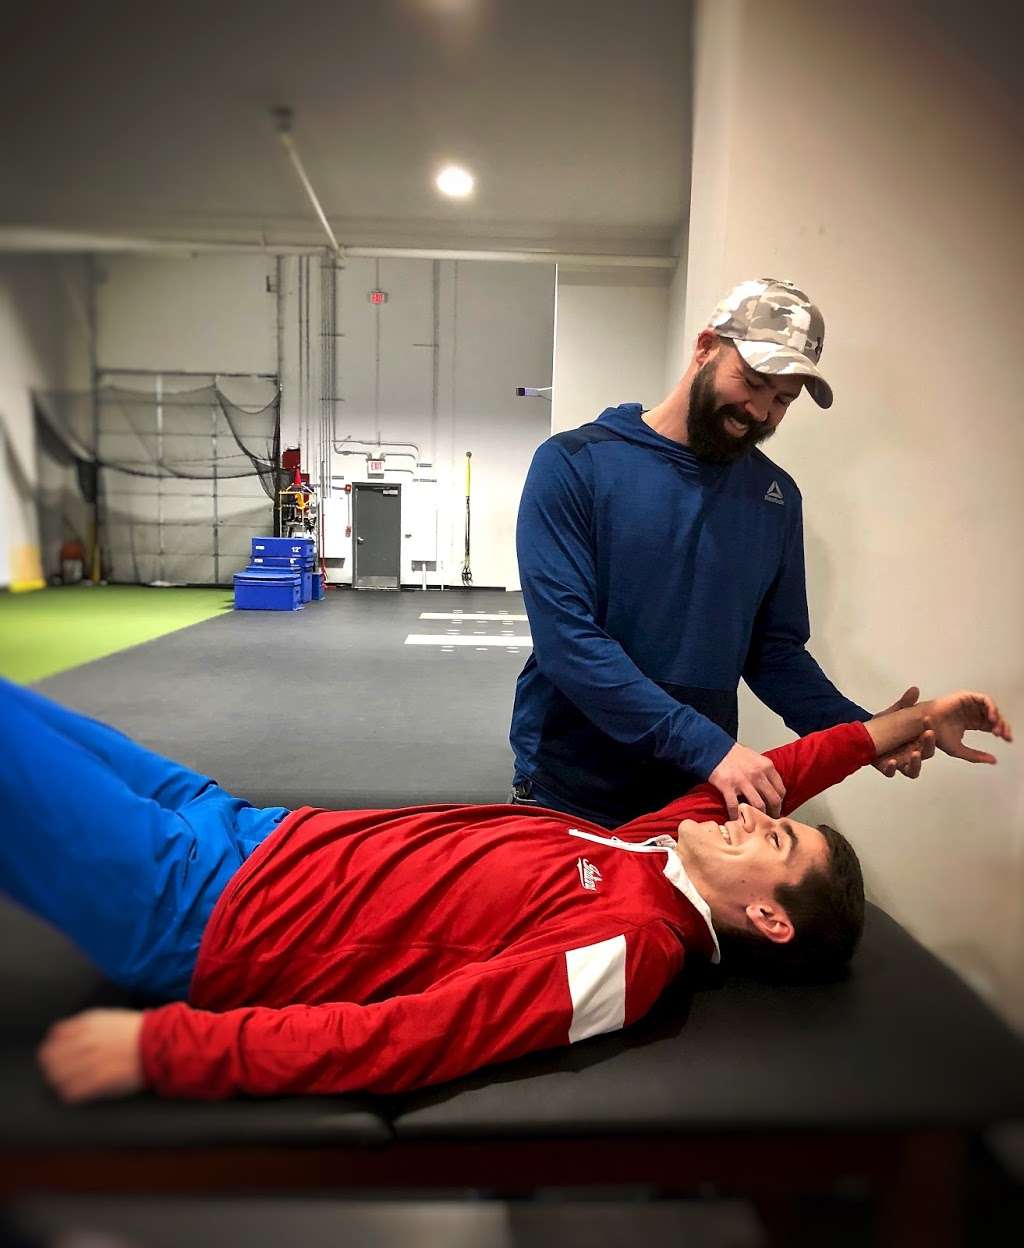 Performance Sports Mobility | 10730 Bennett Pkwy, Zionsville, IN 46077 | Phone: (903) 413-8117